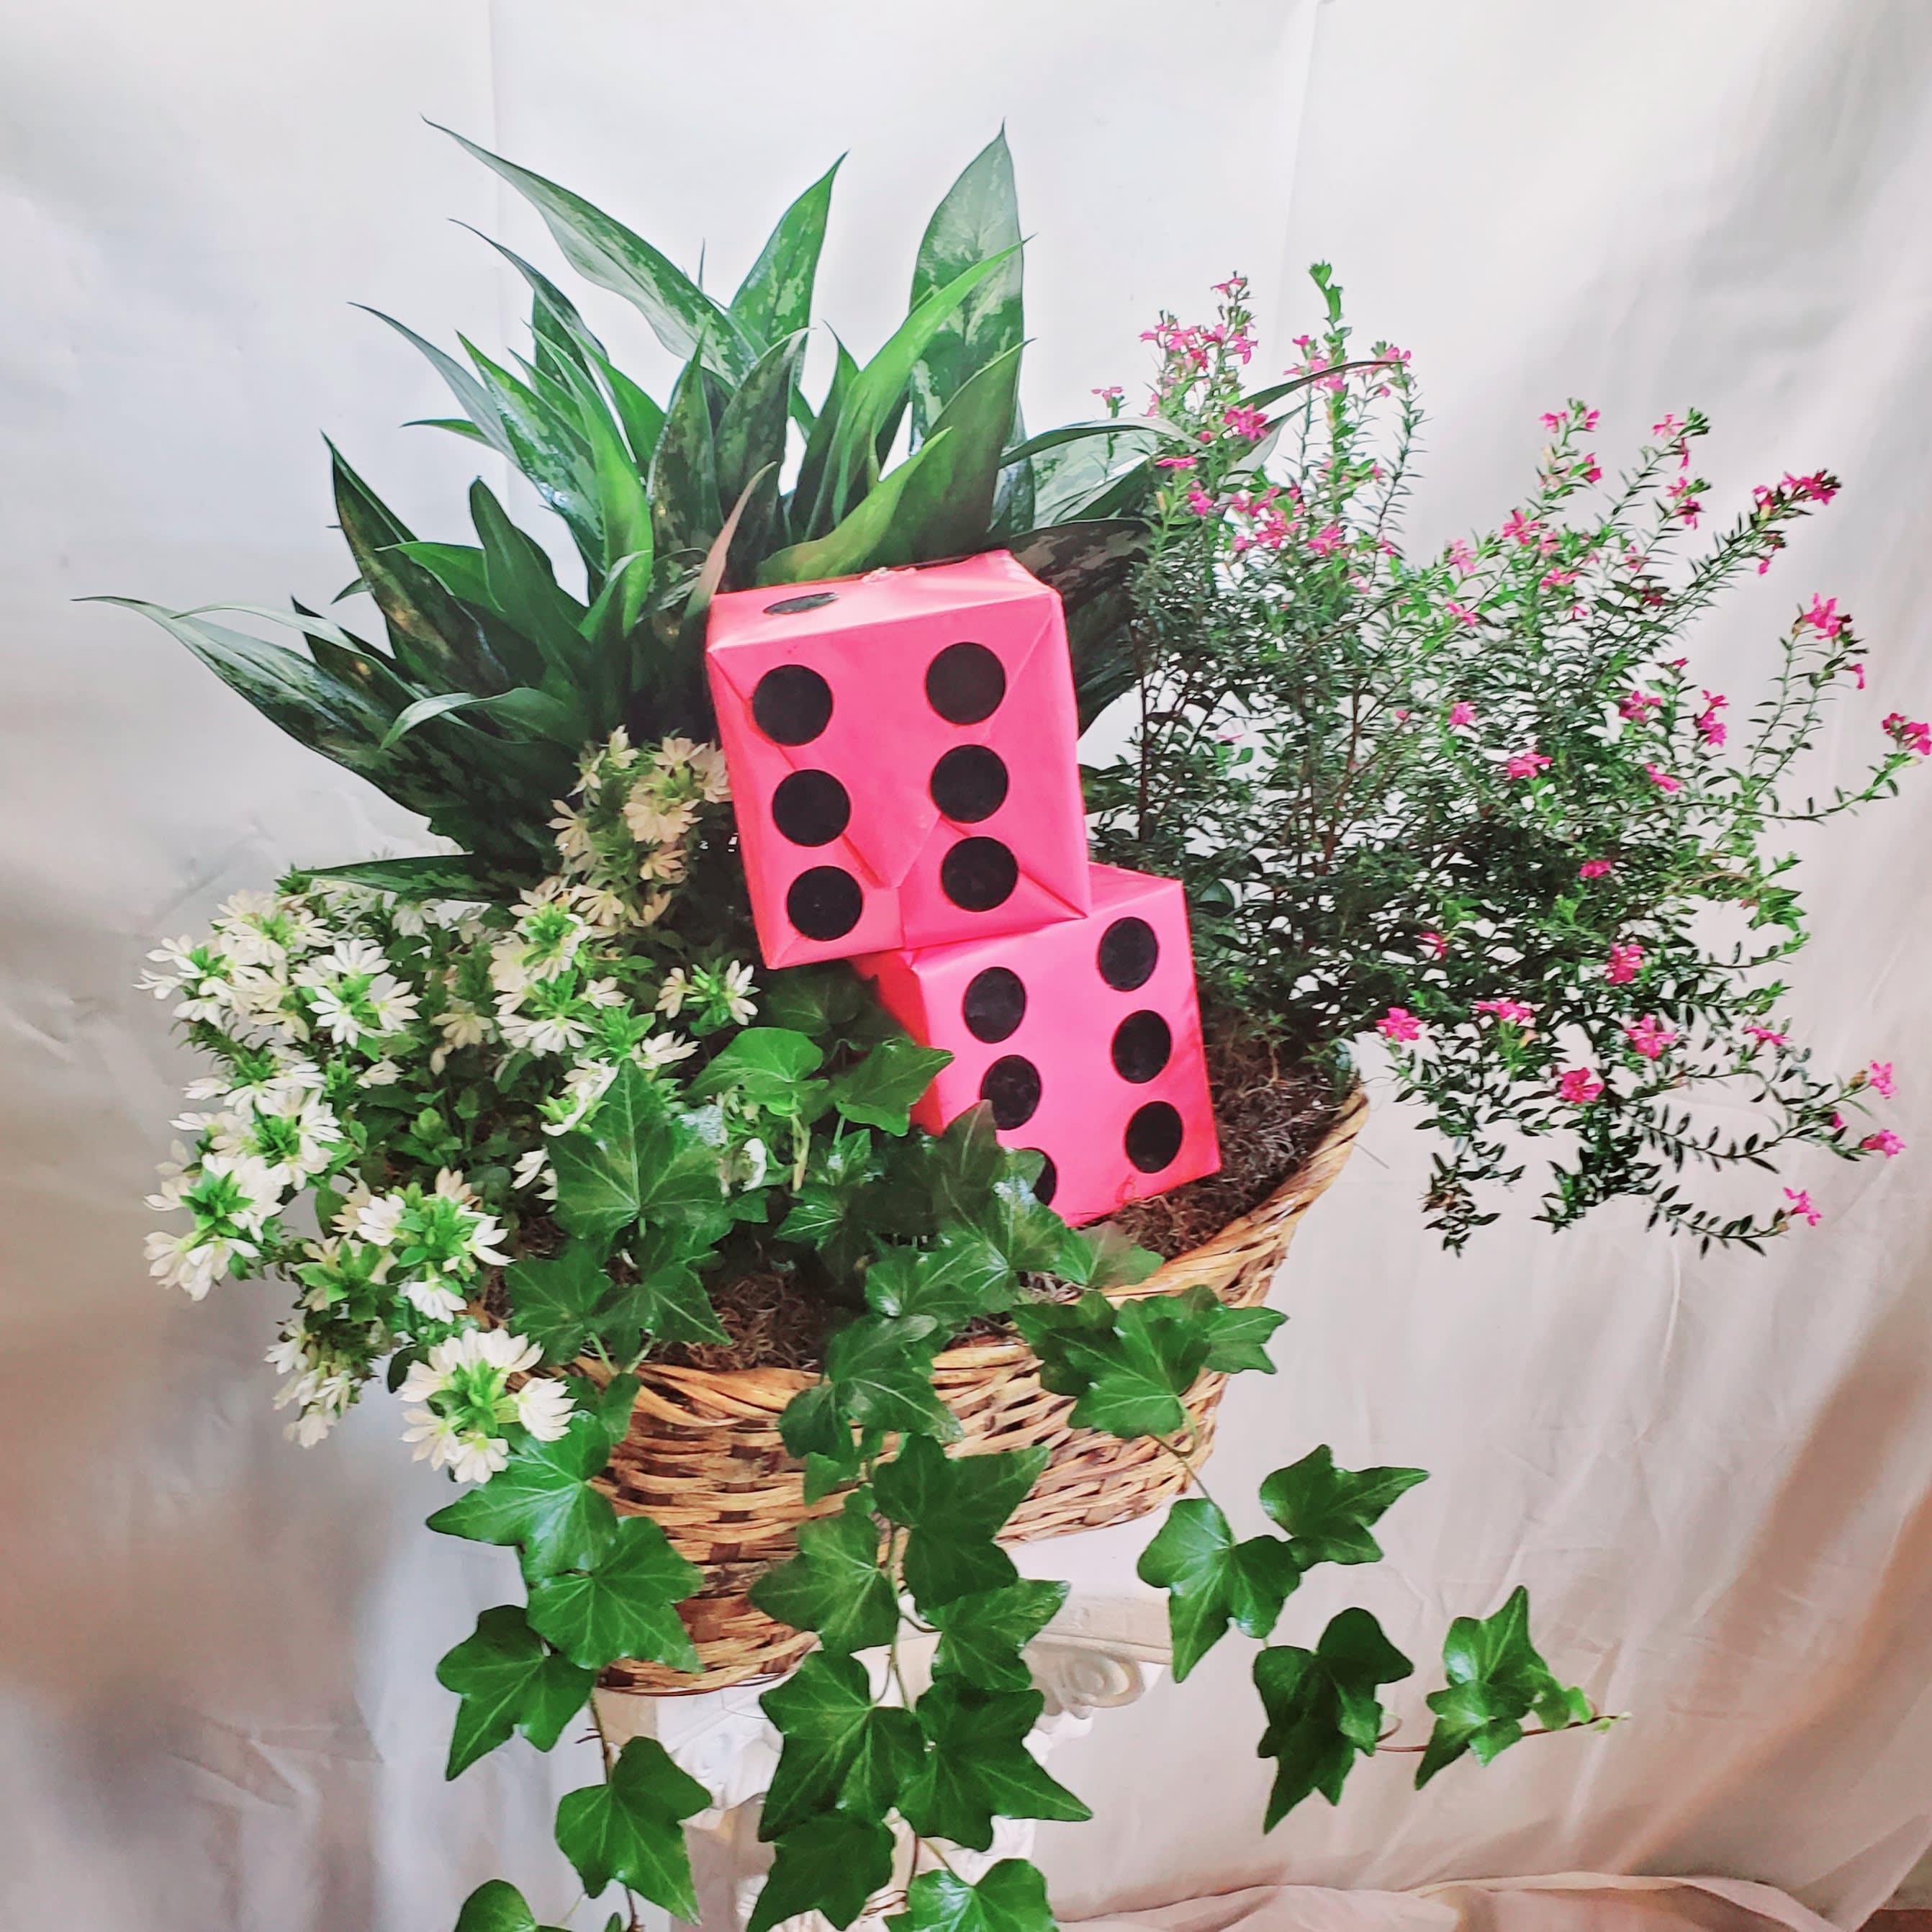 Take a chance without the dice - Send or enjoy a season dish garden around a sentimental piece. In this case it was a set of Bunco dice. 